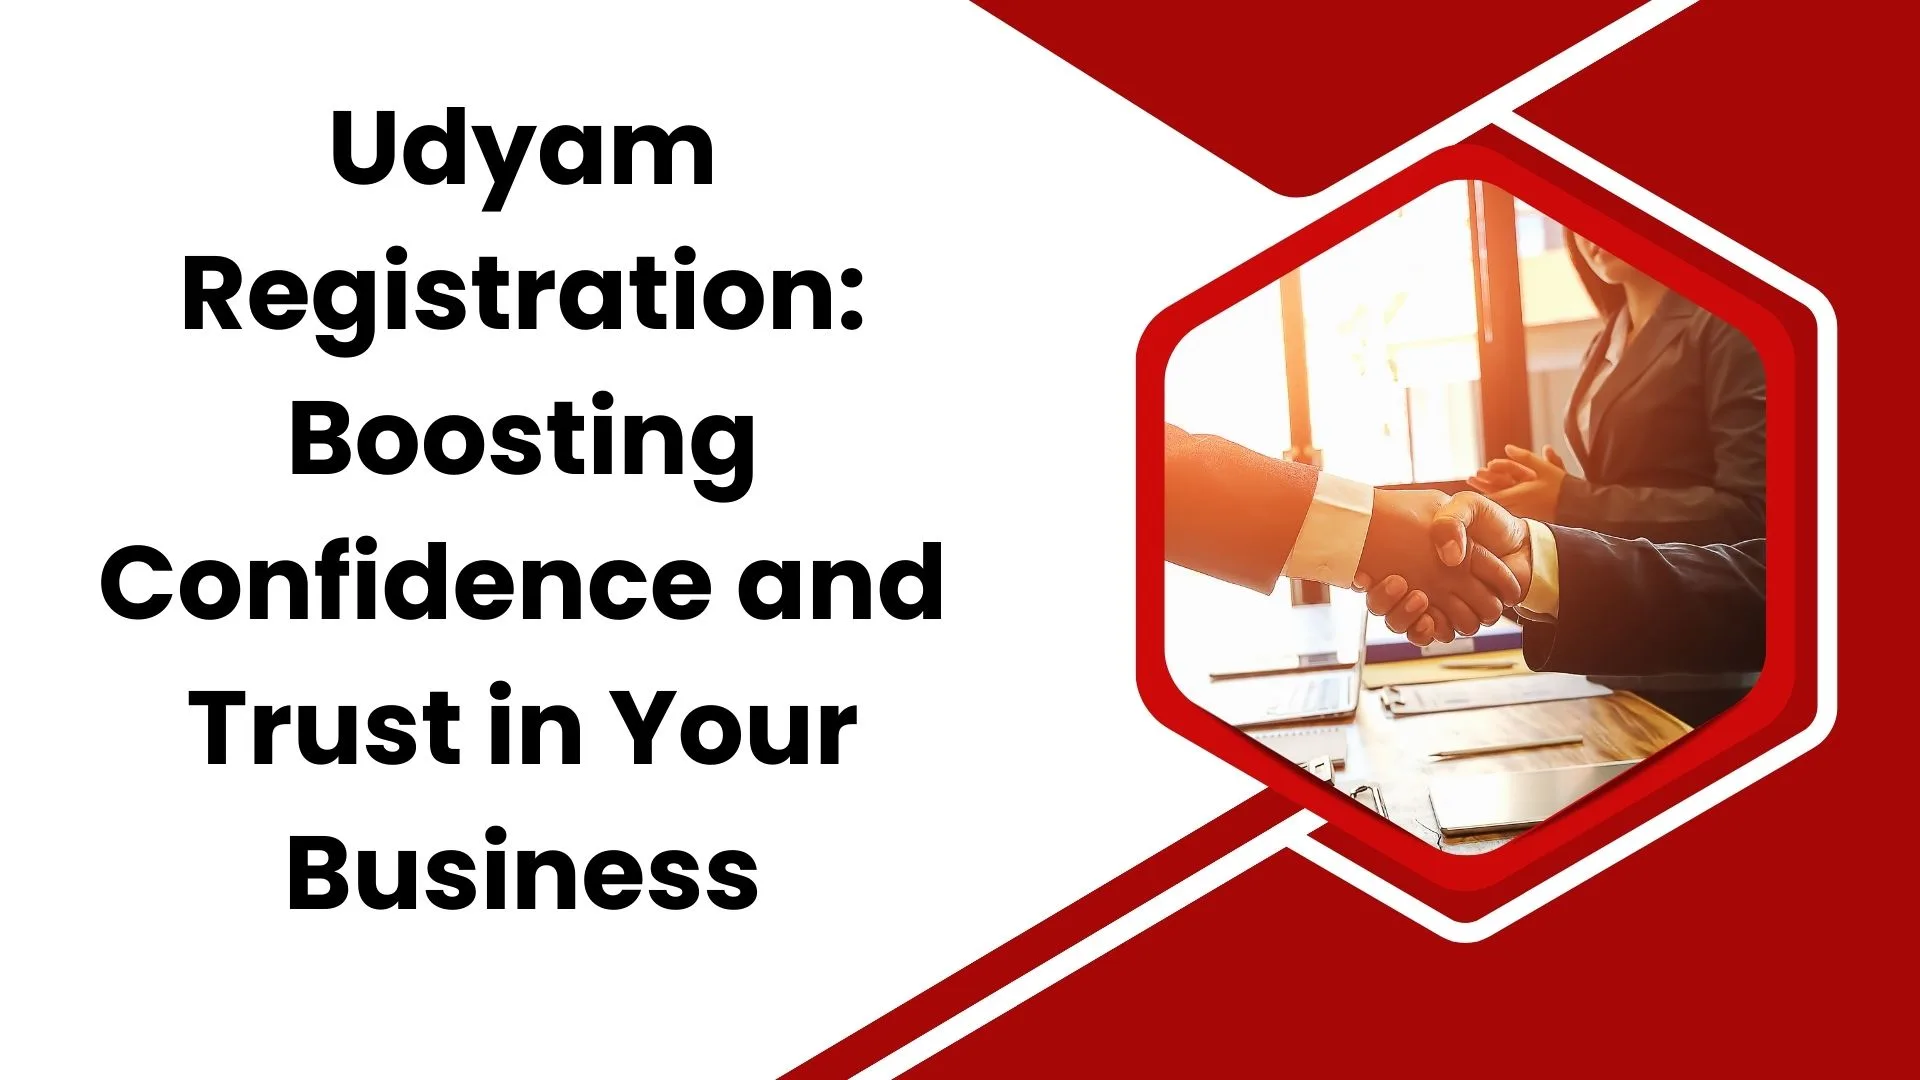 Udyam Registration Boosting Confidence and Trust in Your Business